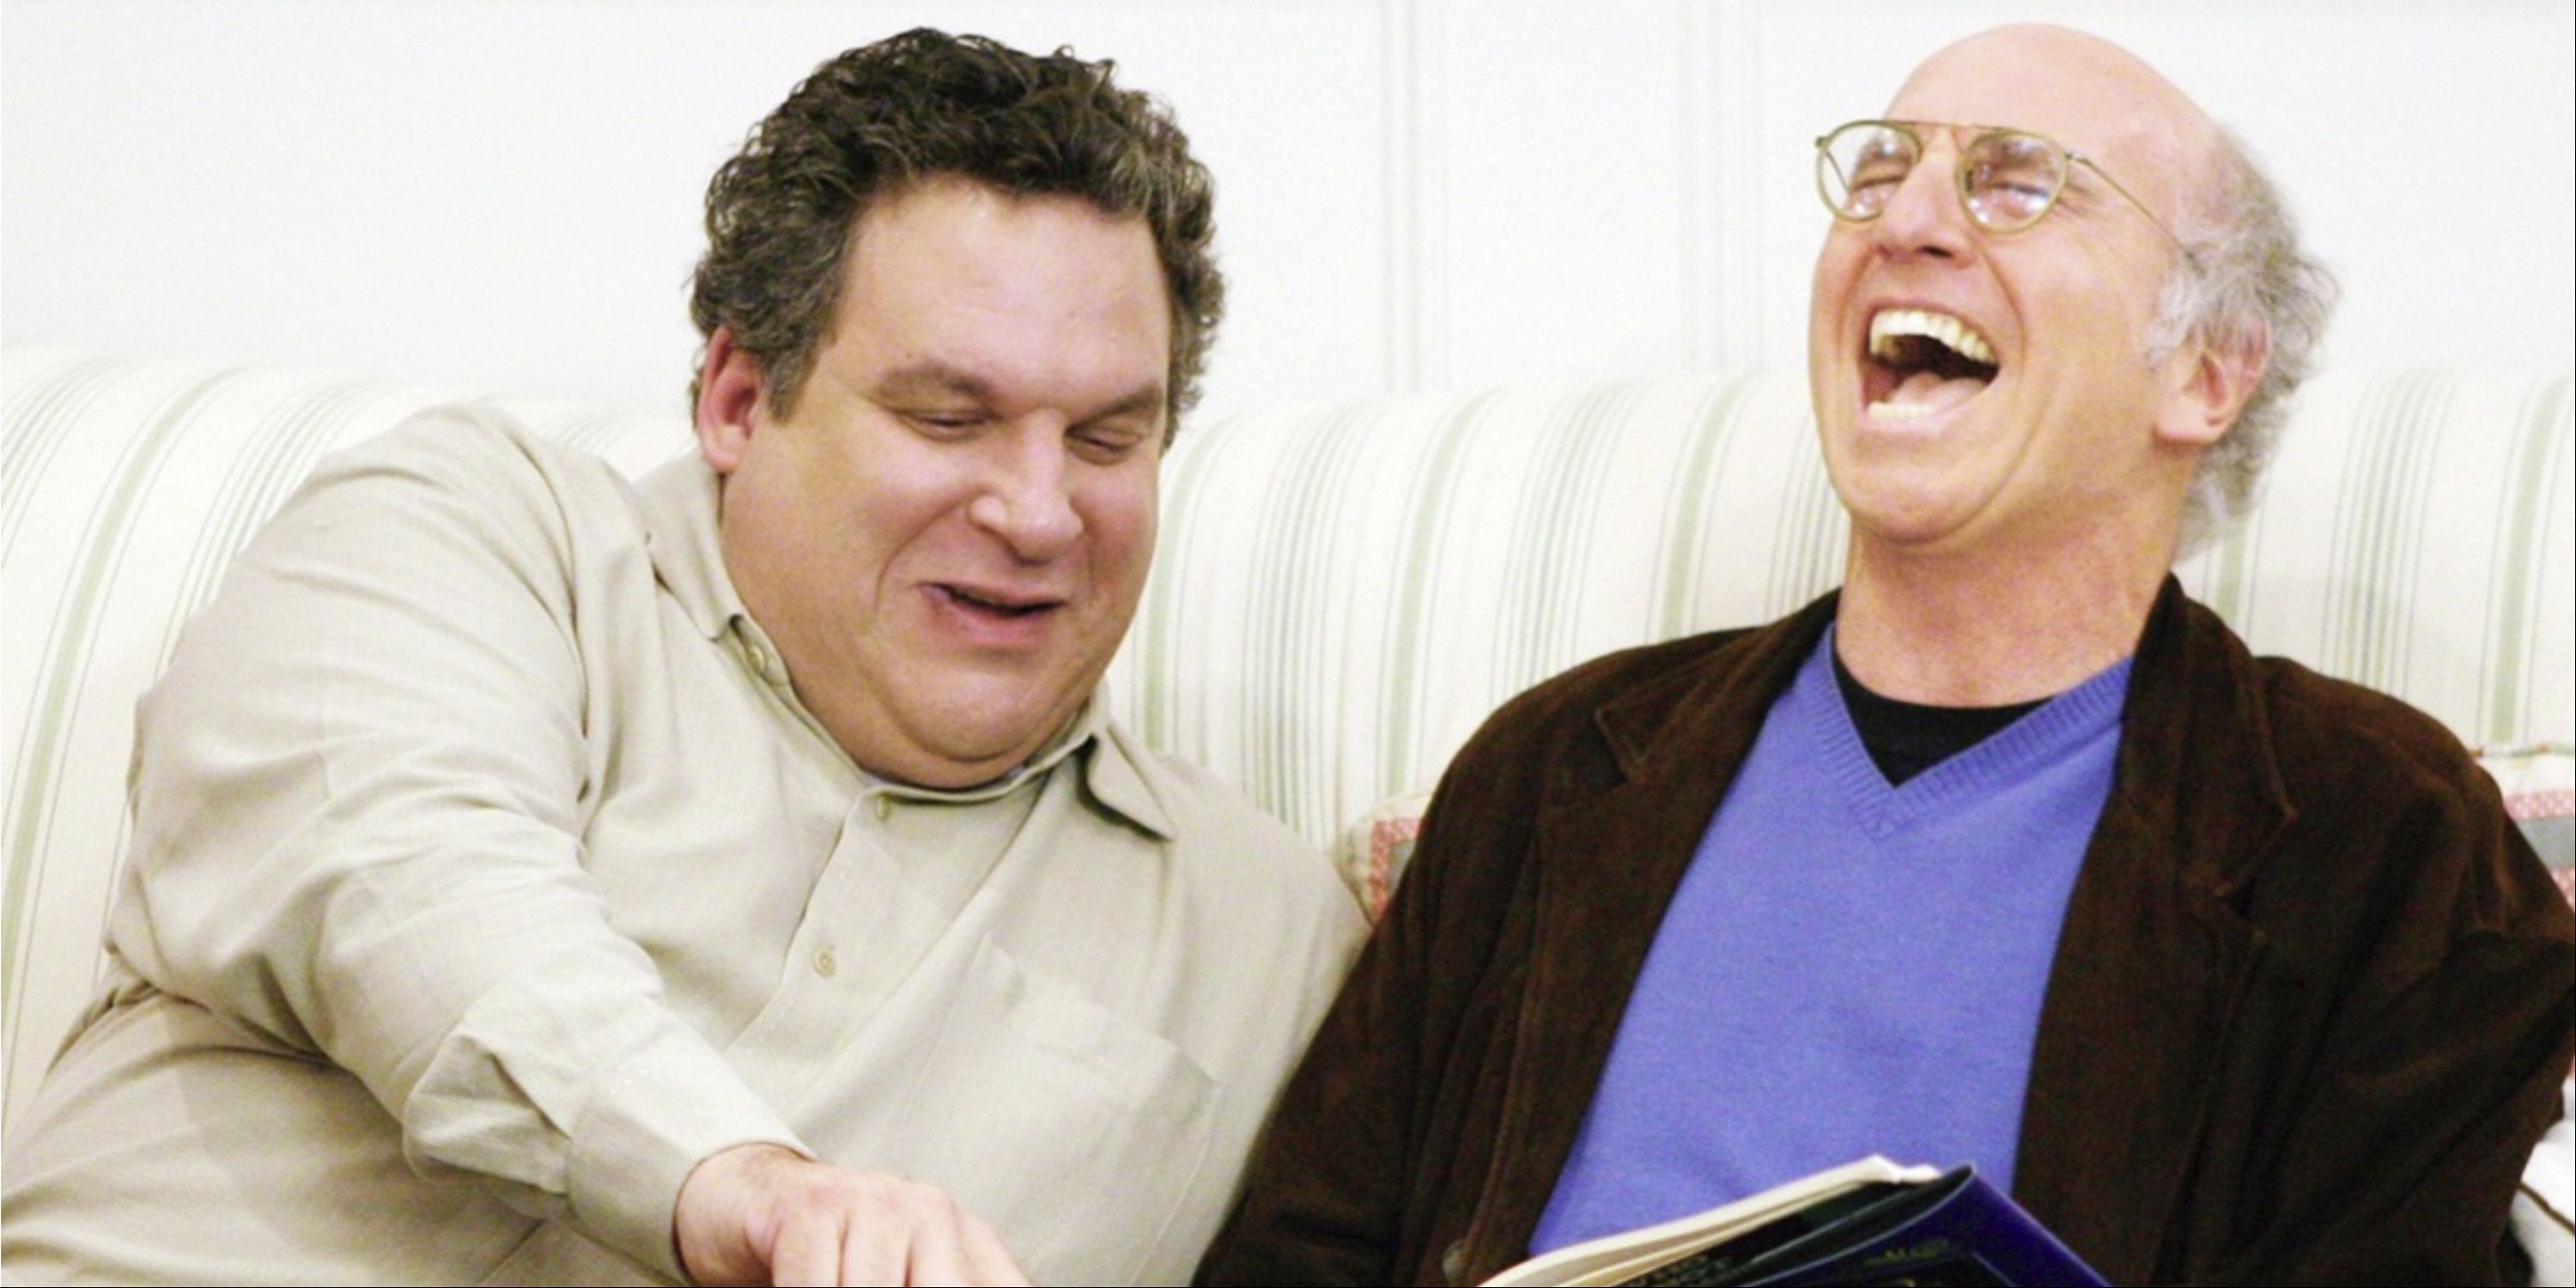 Larry David and Jeff Garlin laughing at a book on the couch in Curb Your Enthusiasm